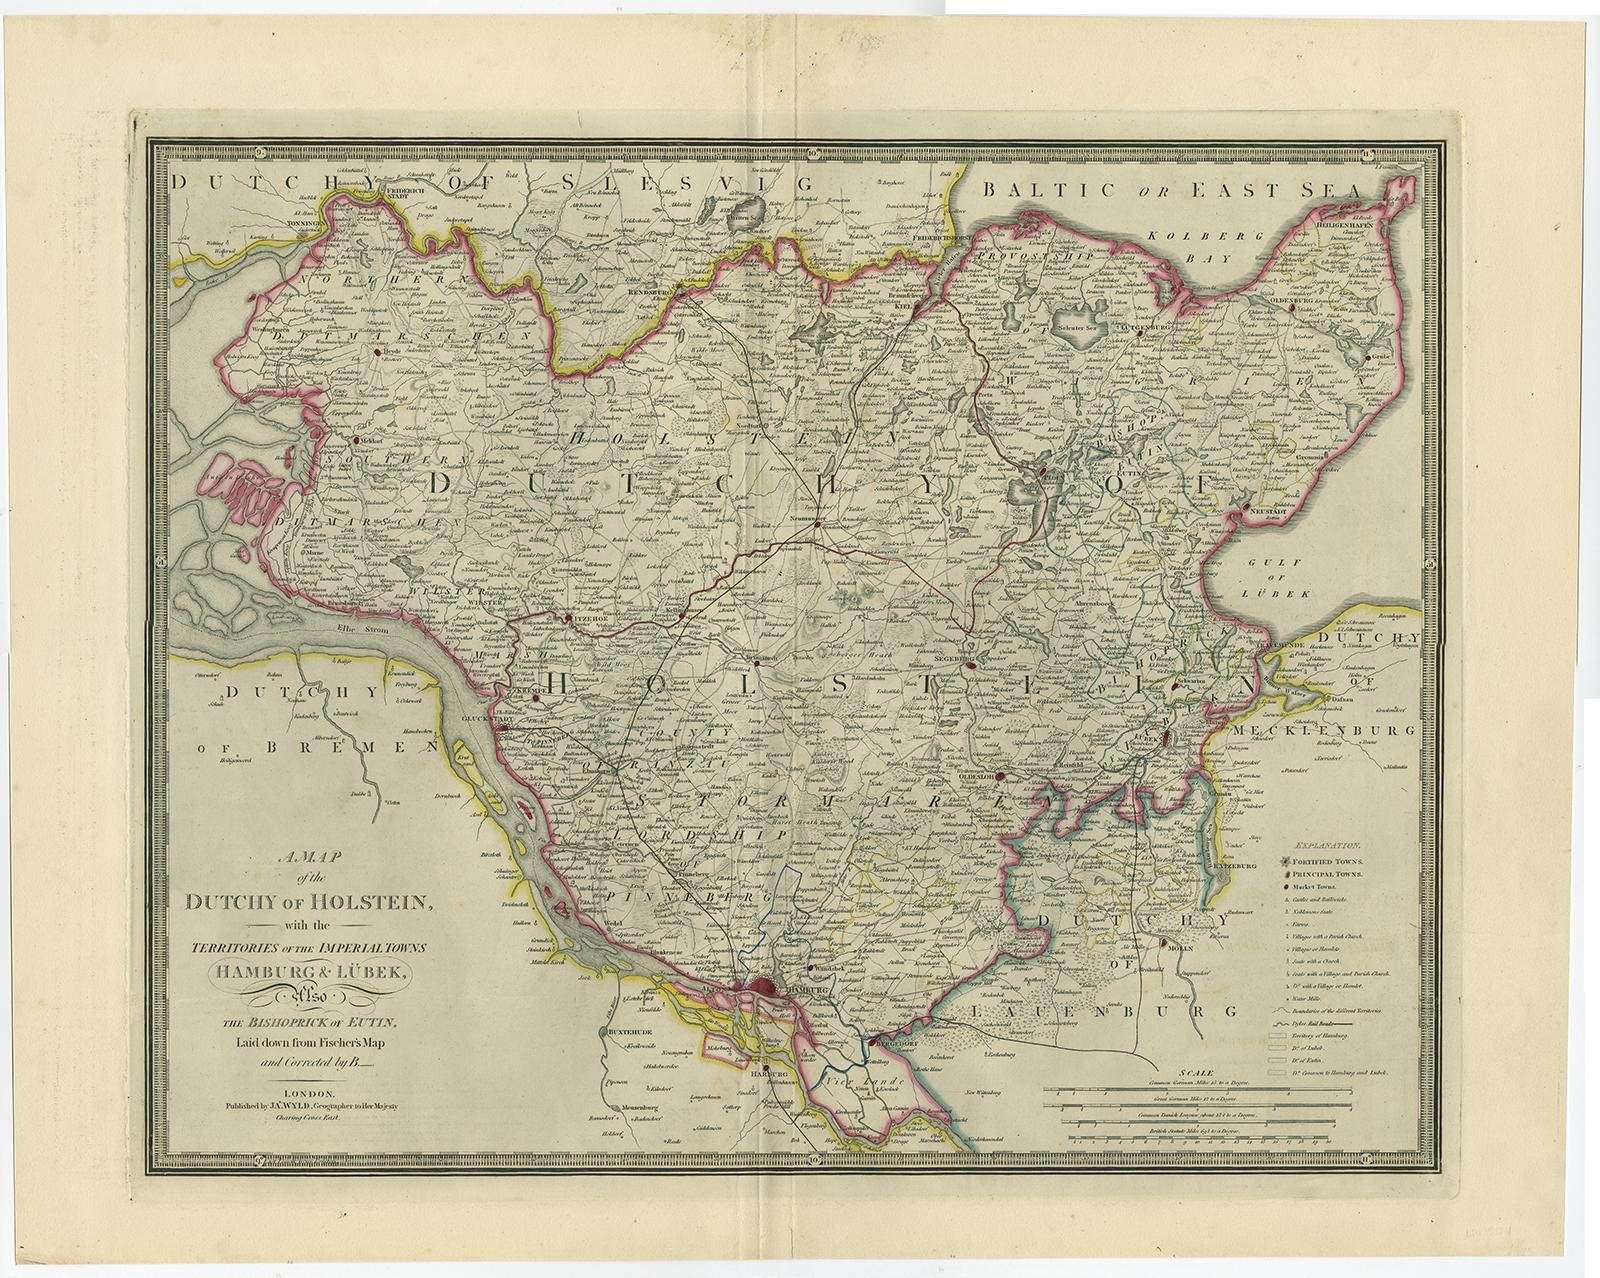 Antique map titled 'A Map of the Dutchy of Holstein, with the Territories of the Imperial Towns Hamburg & Lubek, Also The Bishoprick of Eutin, Laid down from Fischer's Map (..)'. Scarce regional map of Northern Germany, focused on the Duchy of